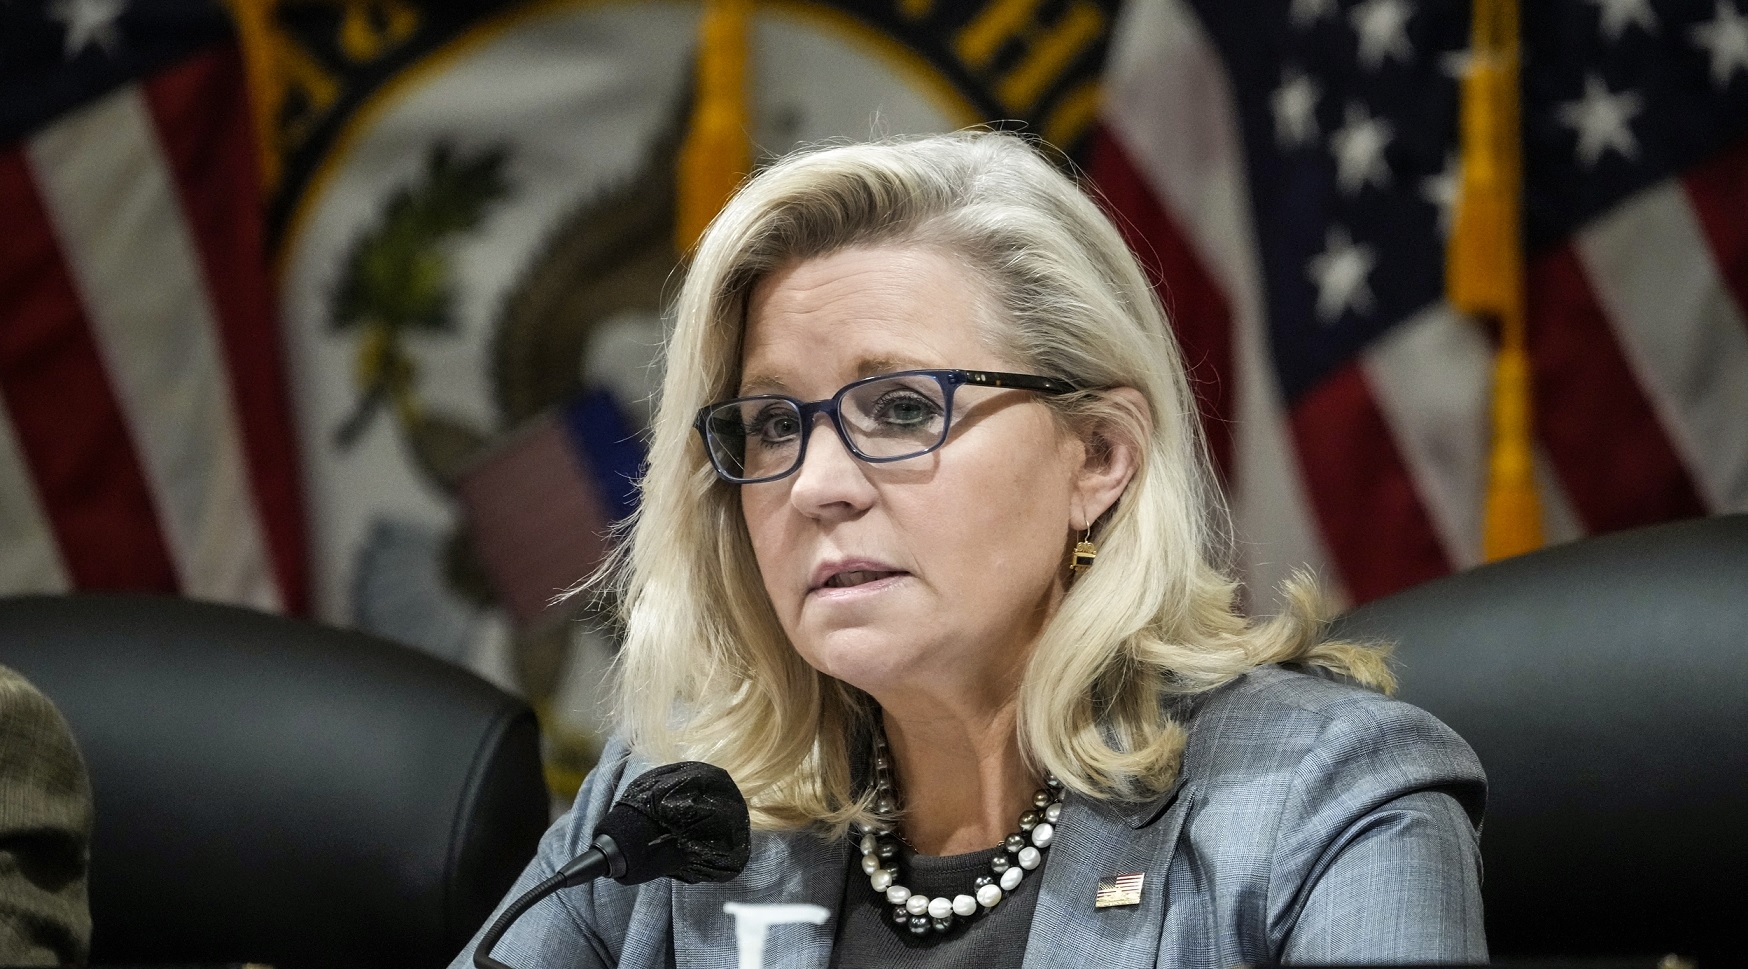 Liz Cheney confesses that she is thinking of running for president in 2024